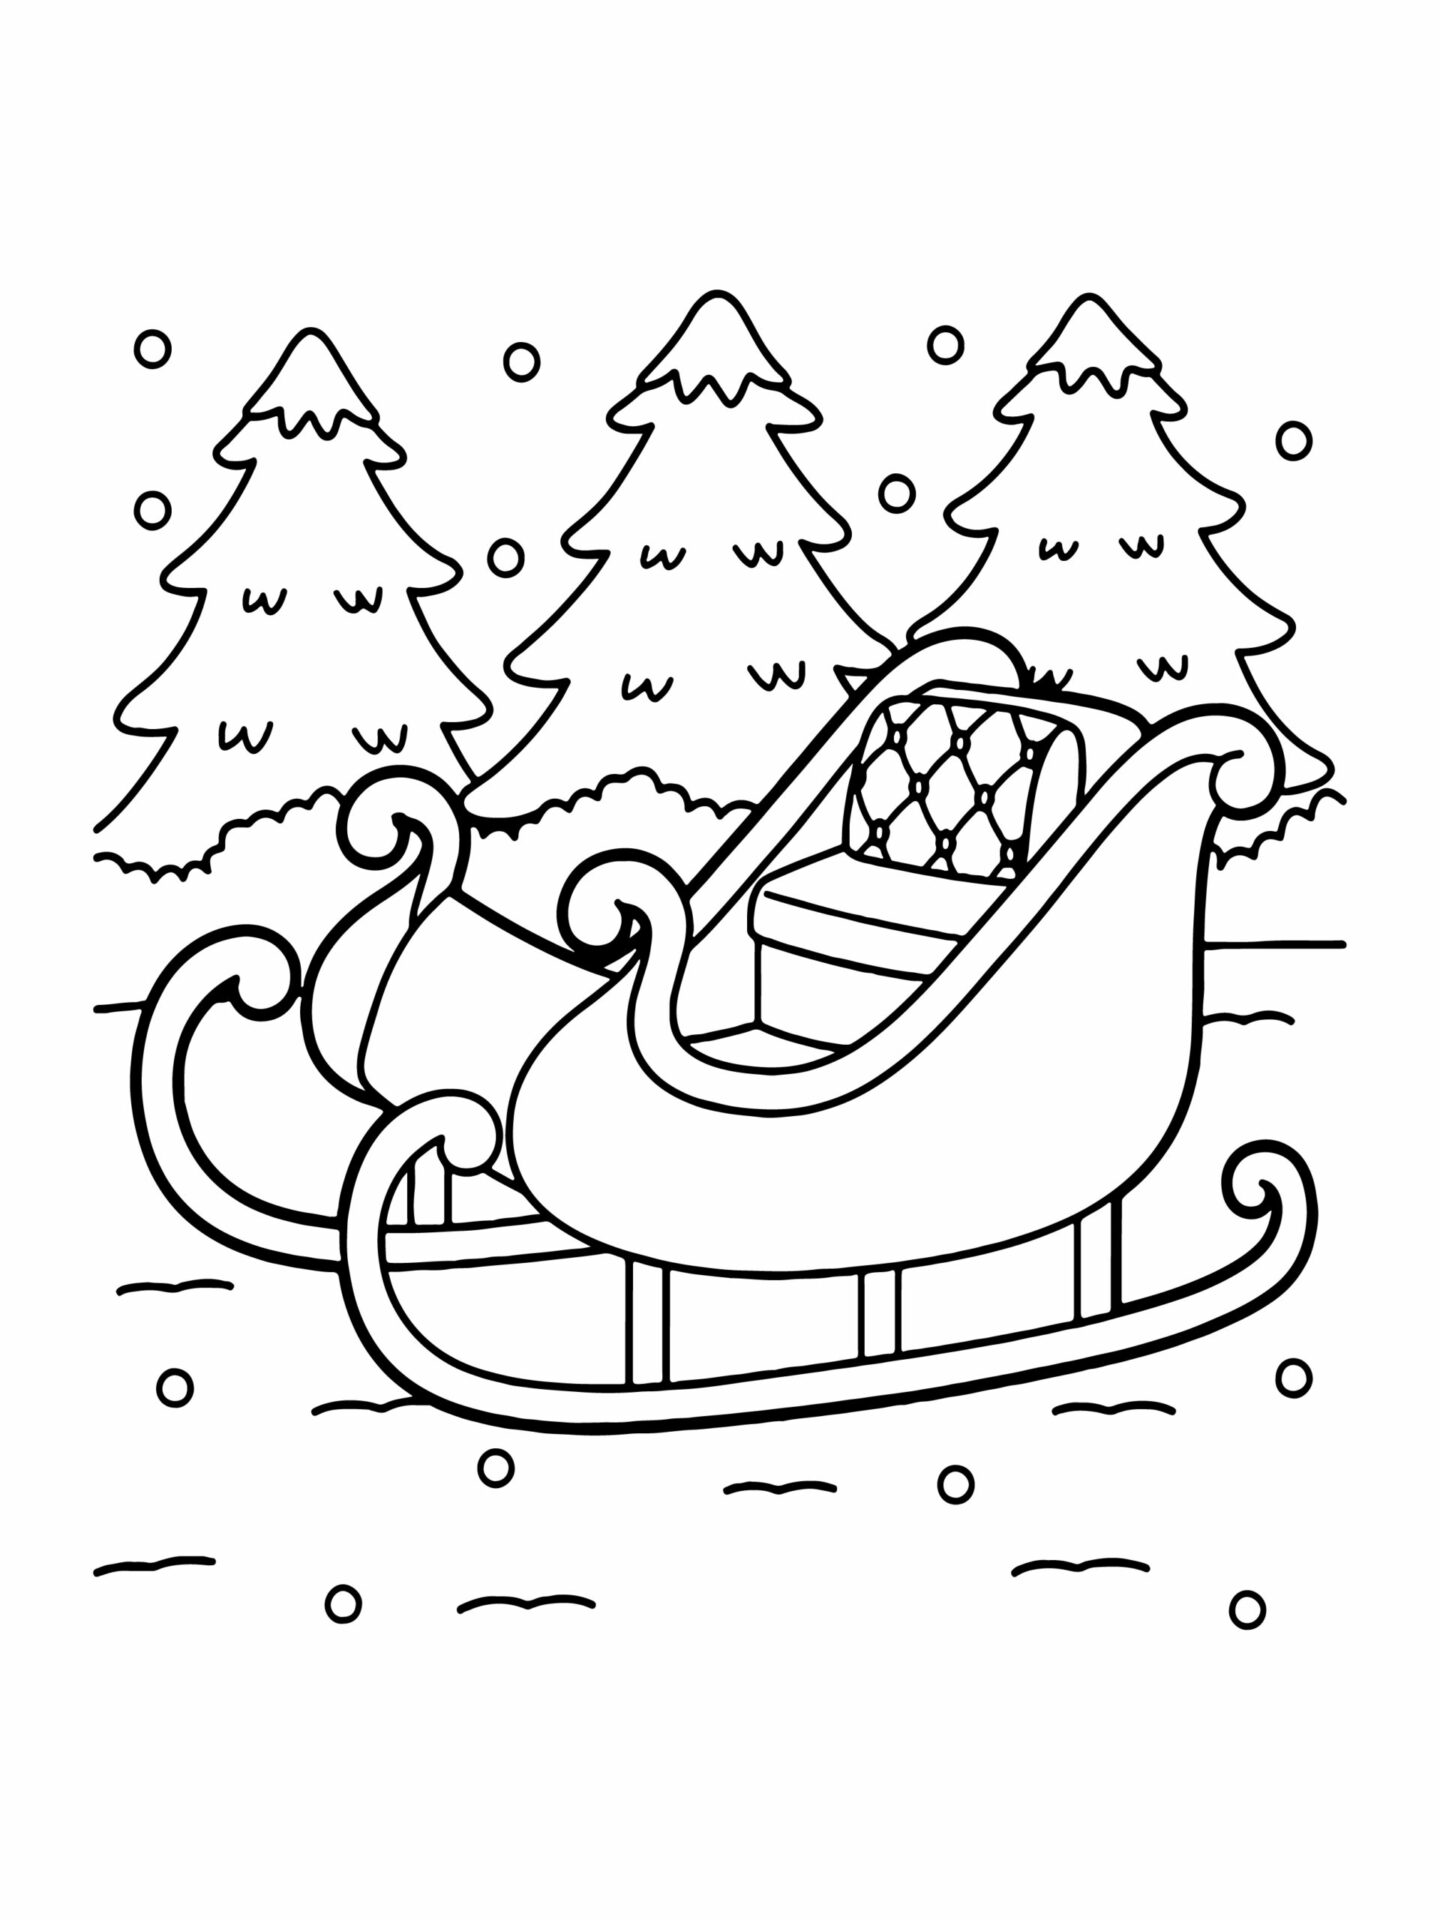 lark Christmas Coloring Page - Free Printable Coloring Pages for Kids